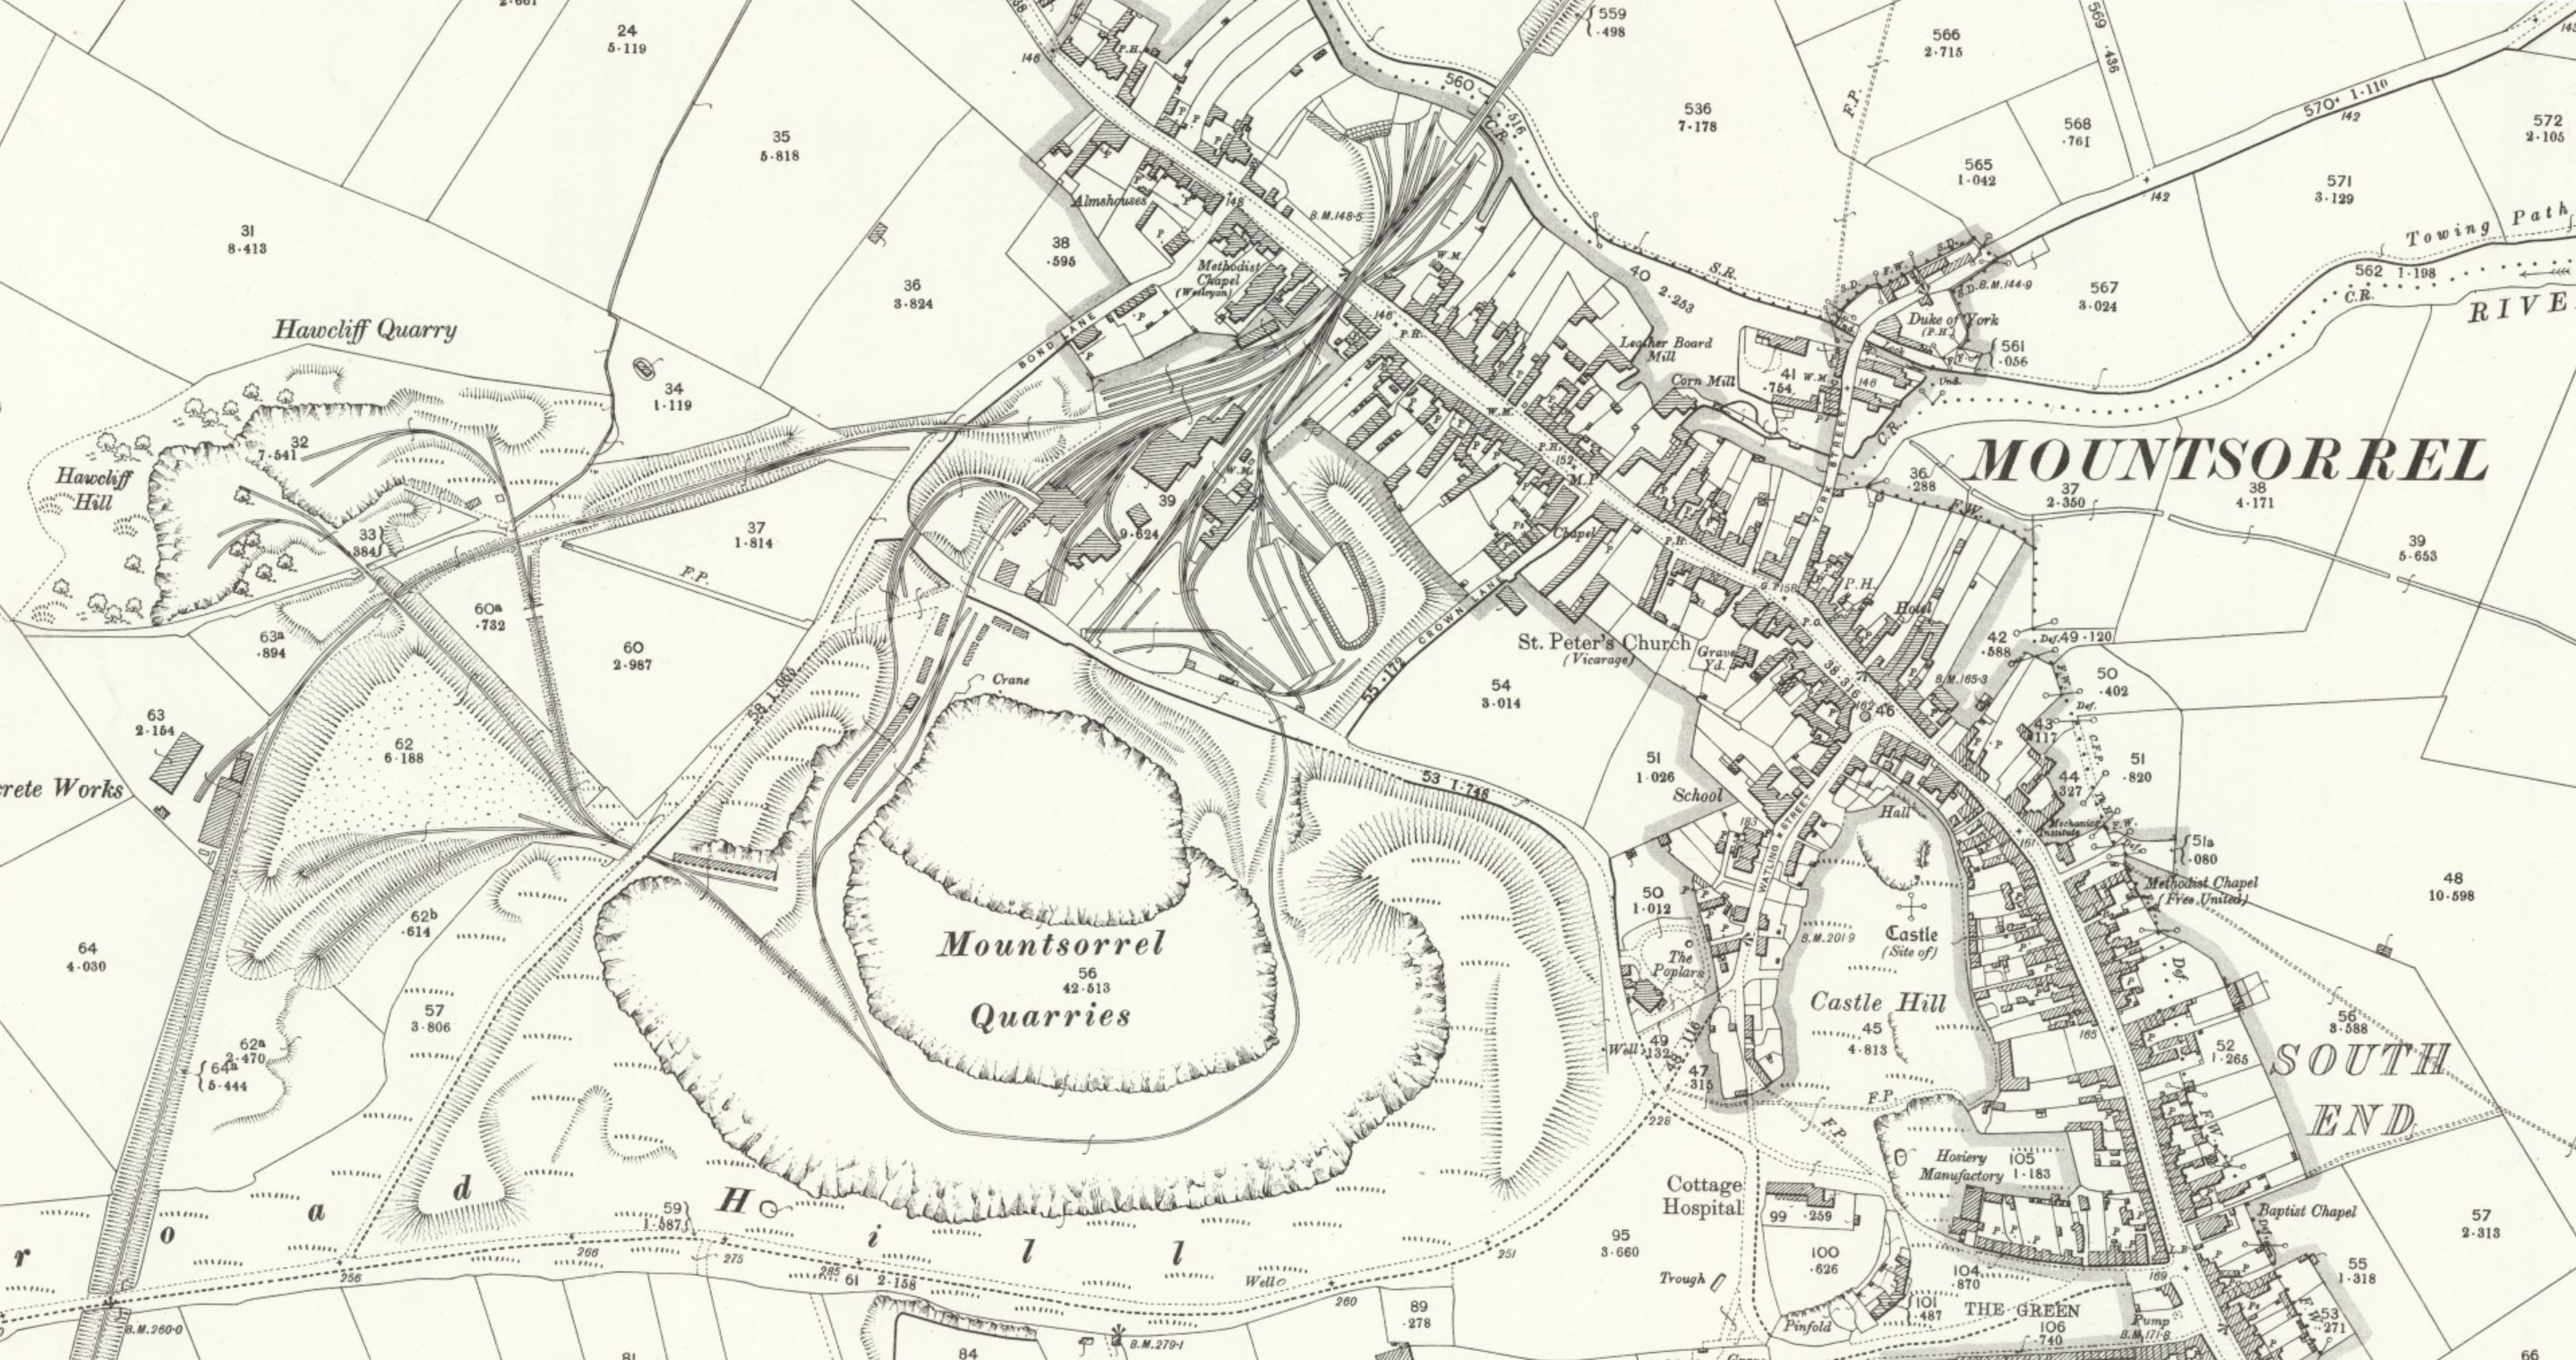 Mountsorrel Quarries Reproduced with the permission of the National Library of ScotlandJPG